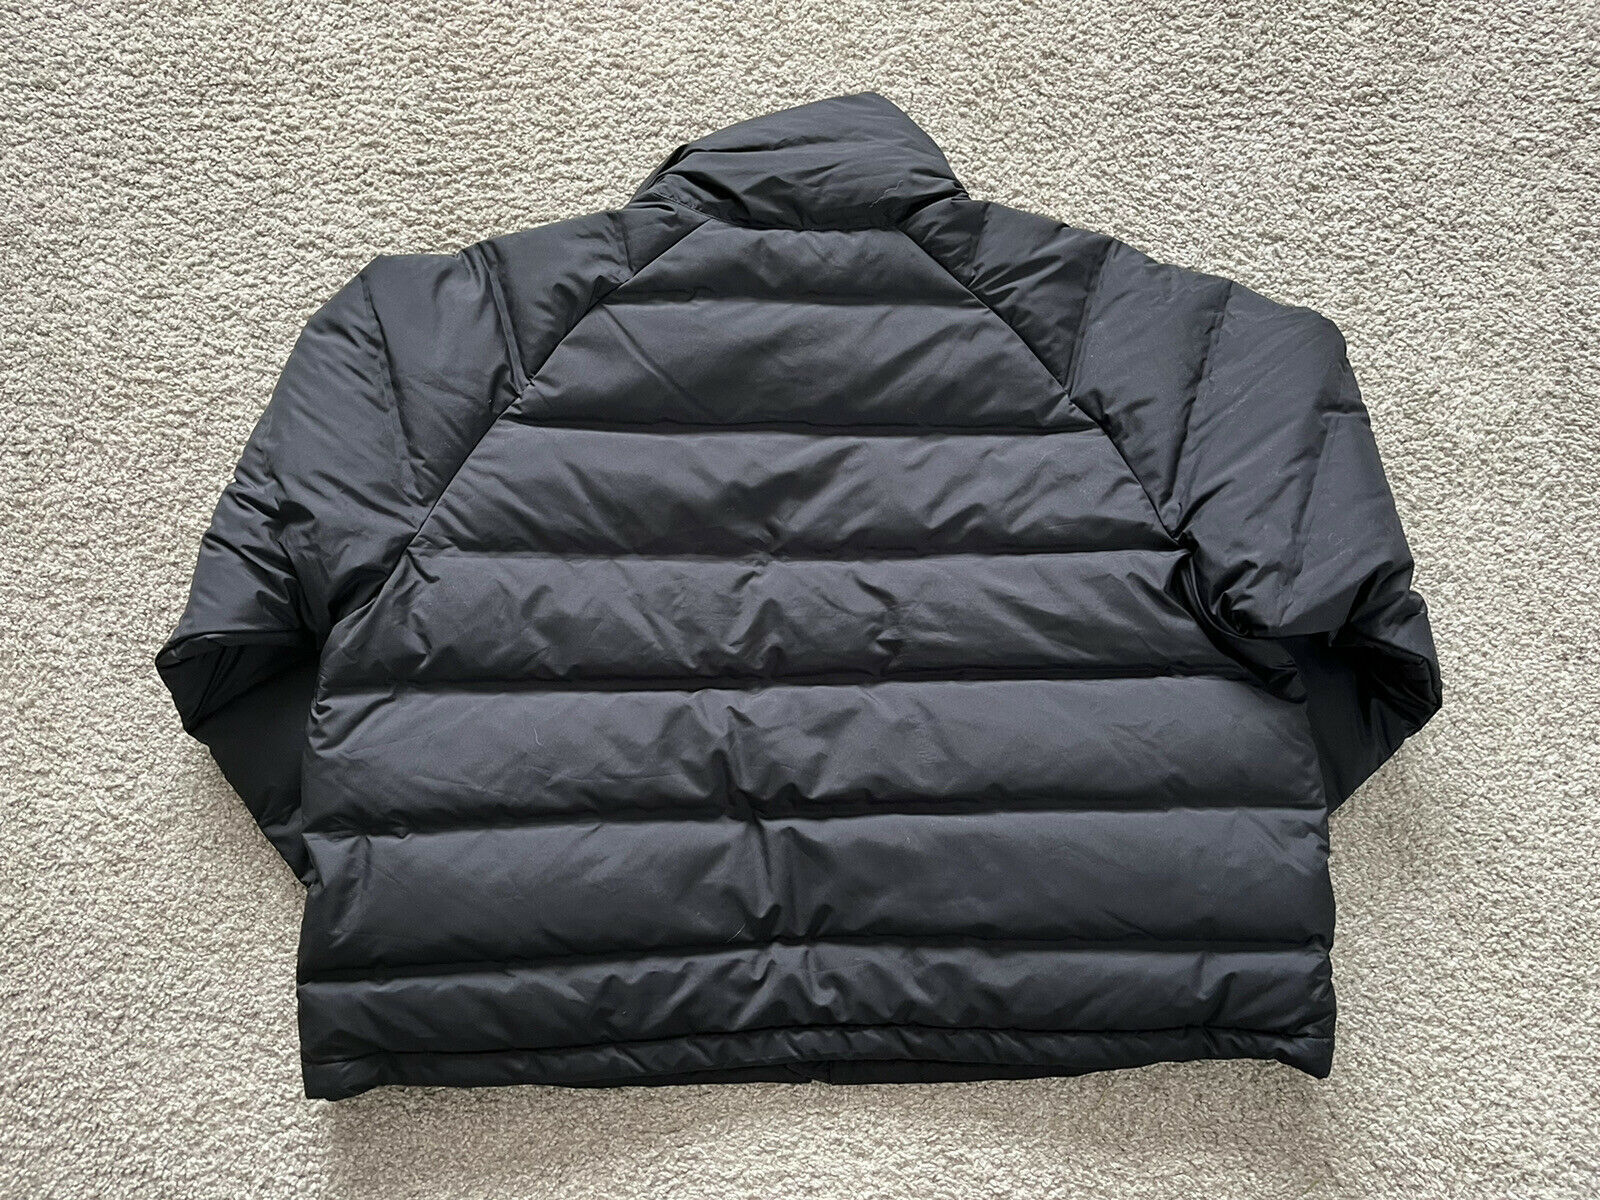 Adidas Lifestyle Helionic Relaxed Fit Puffer Women\'s XL Down Jacket White  Black | eBay